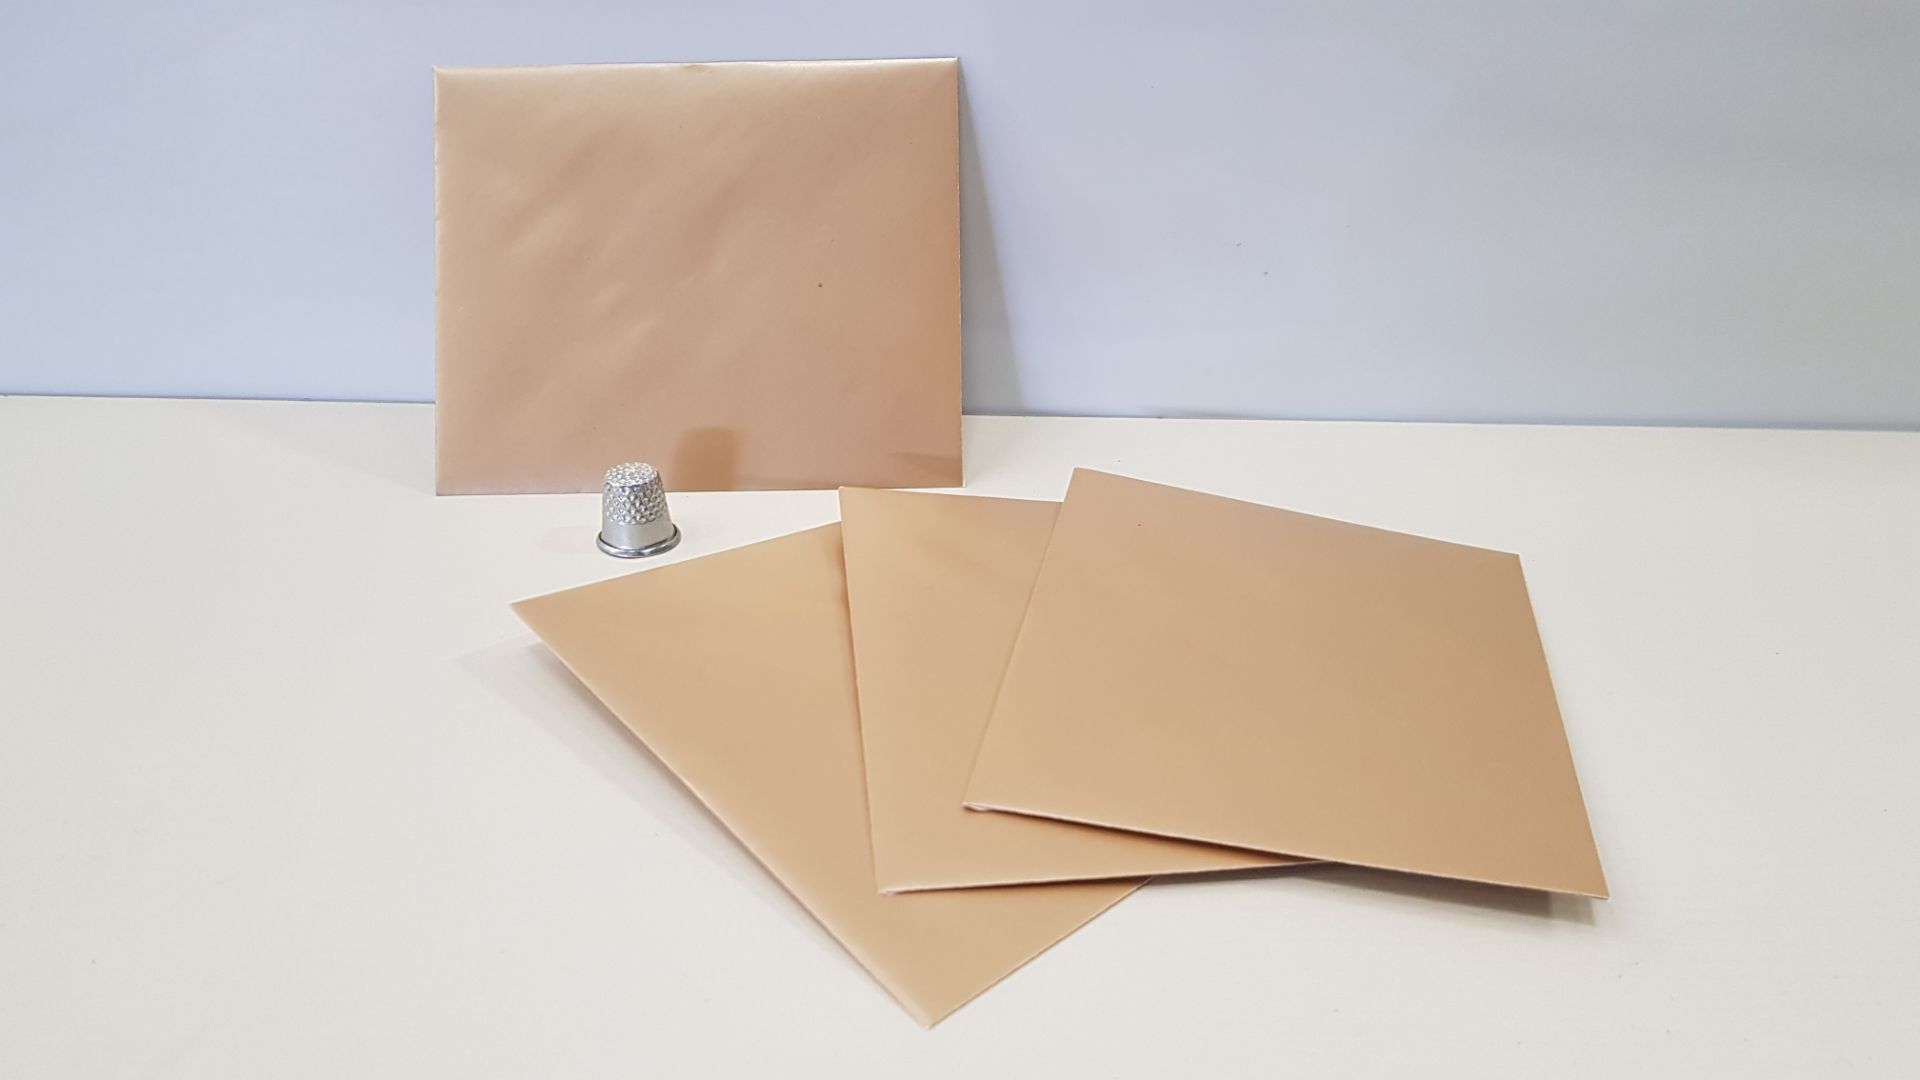 4000 X BRAND NEW SMALL GOLD INVITATION ENVELOPES - IN 2 BOXES